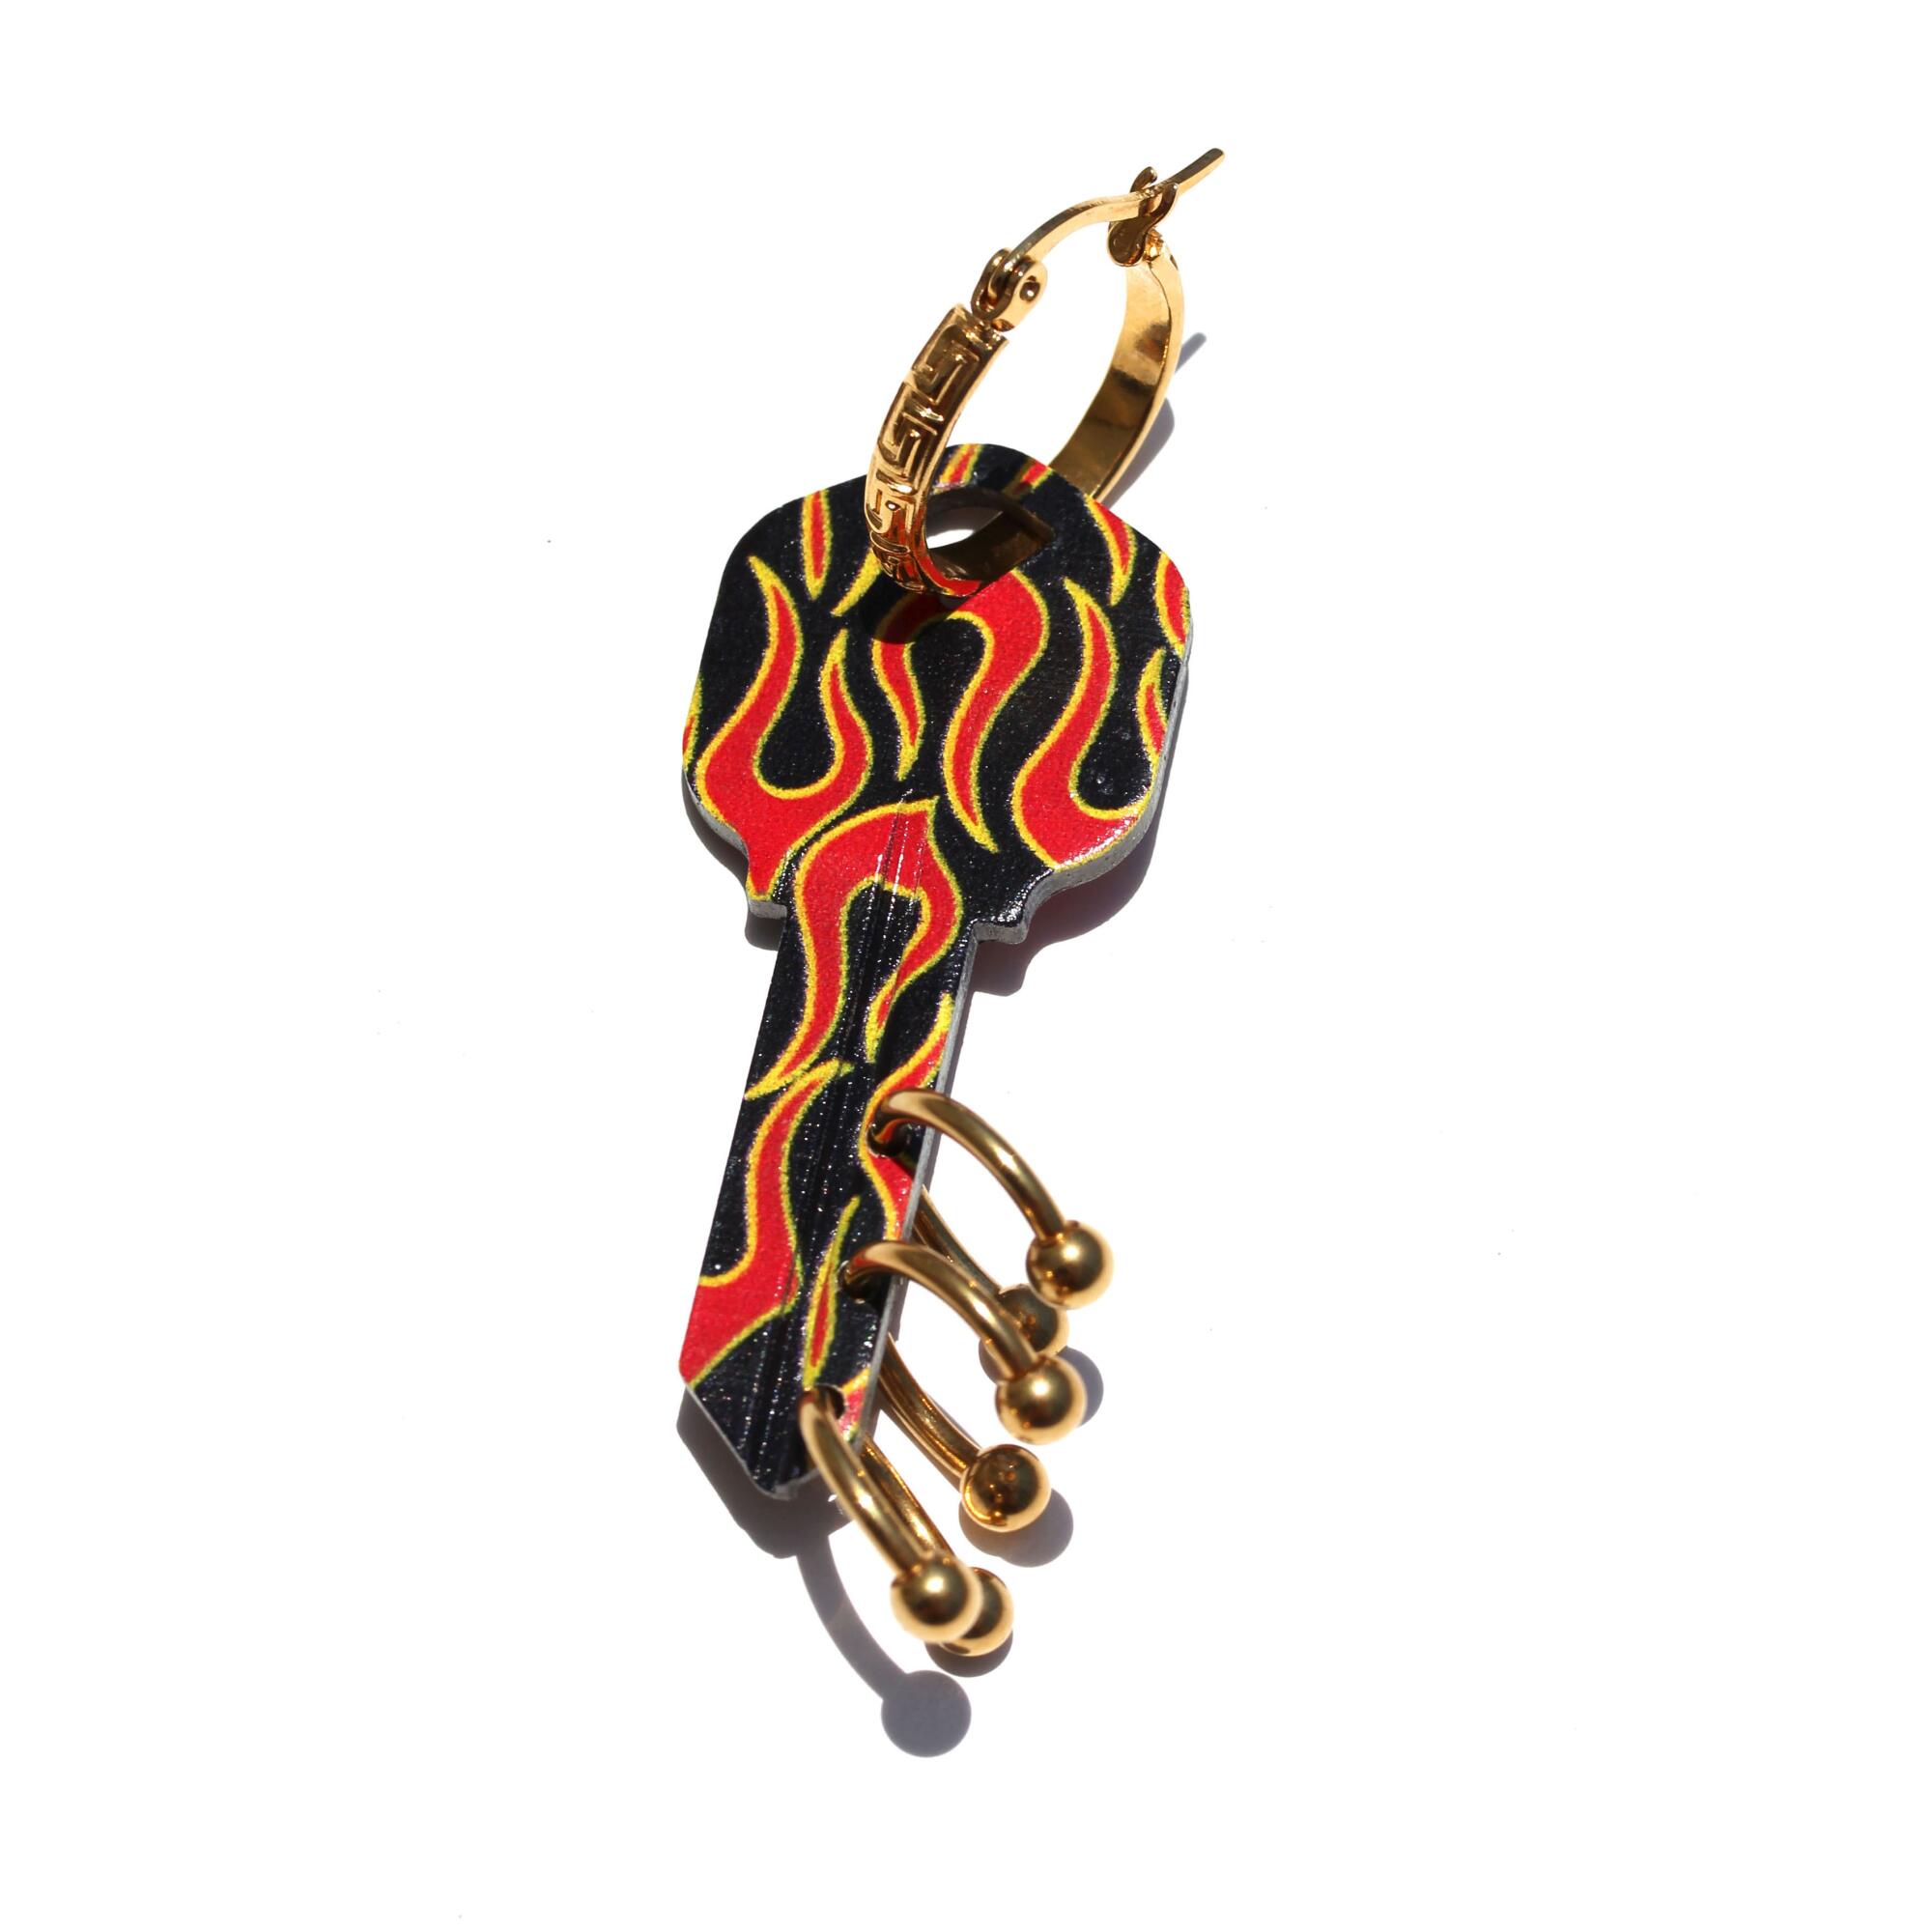 An earring shaped like a house key and painted with racing flames.